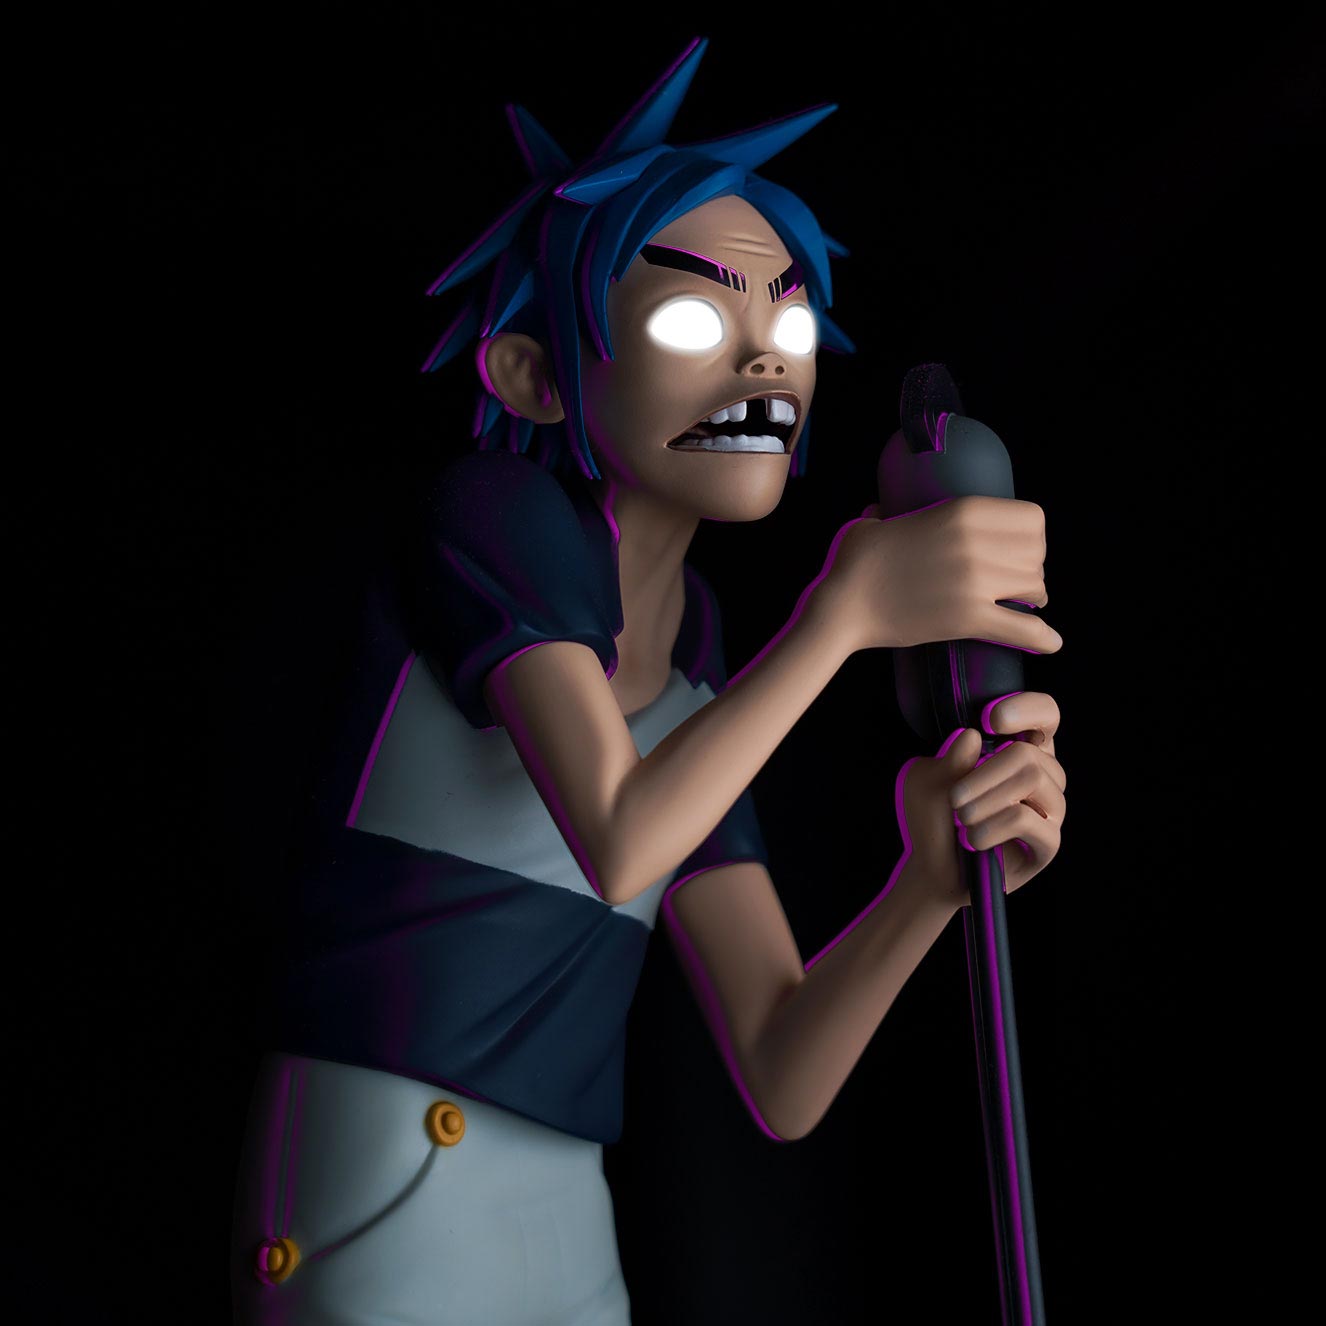 A statue of 2D from the Gorillaz on a black background.